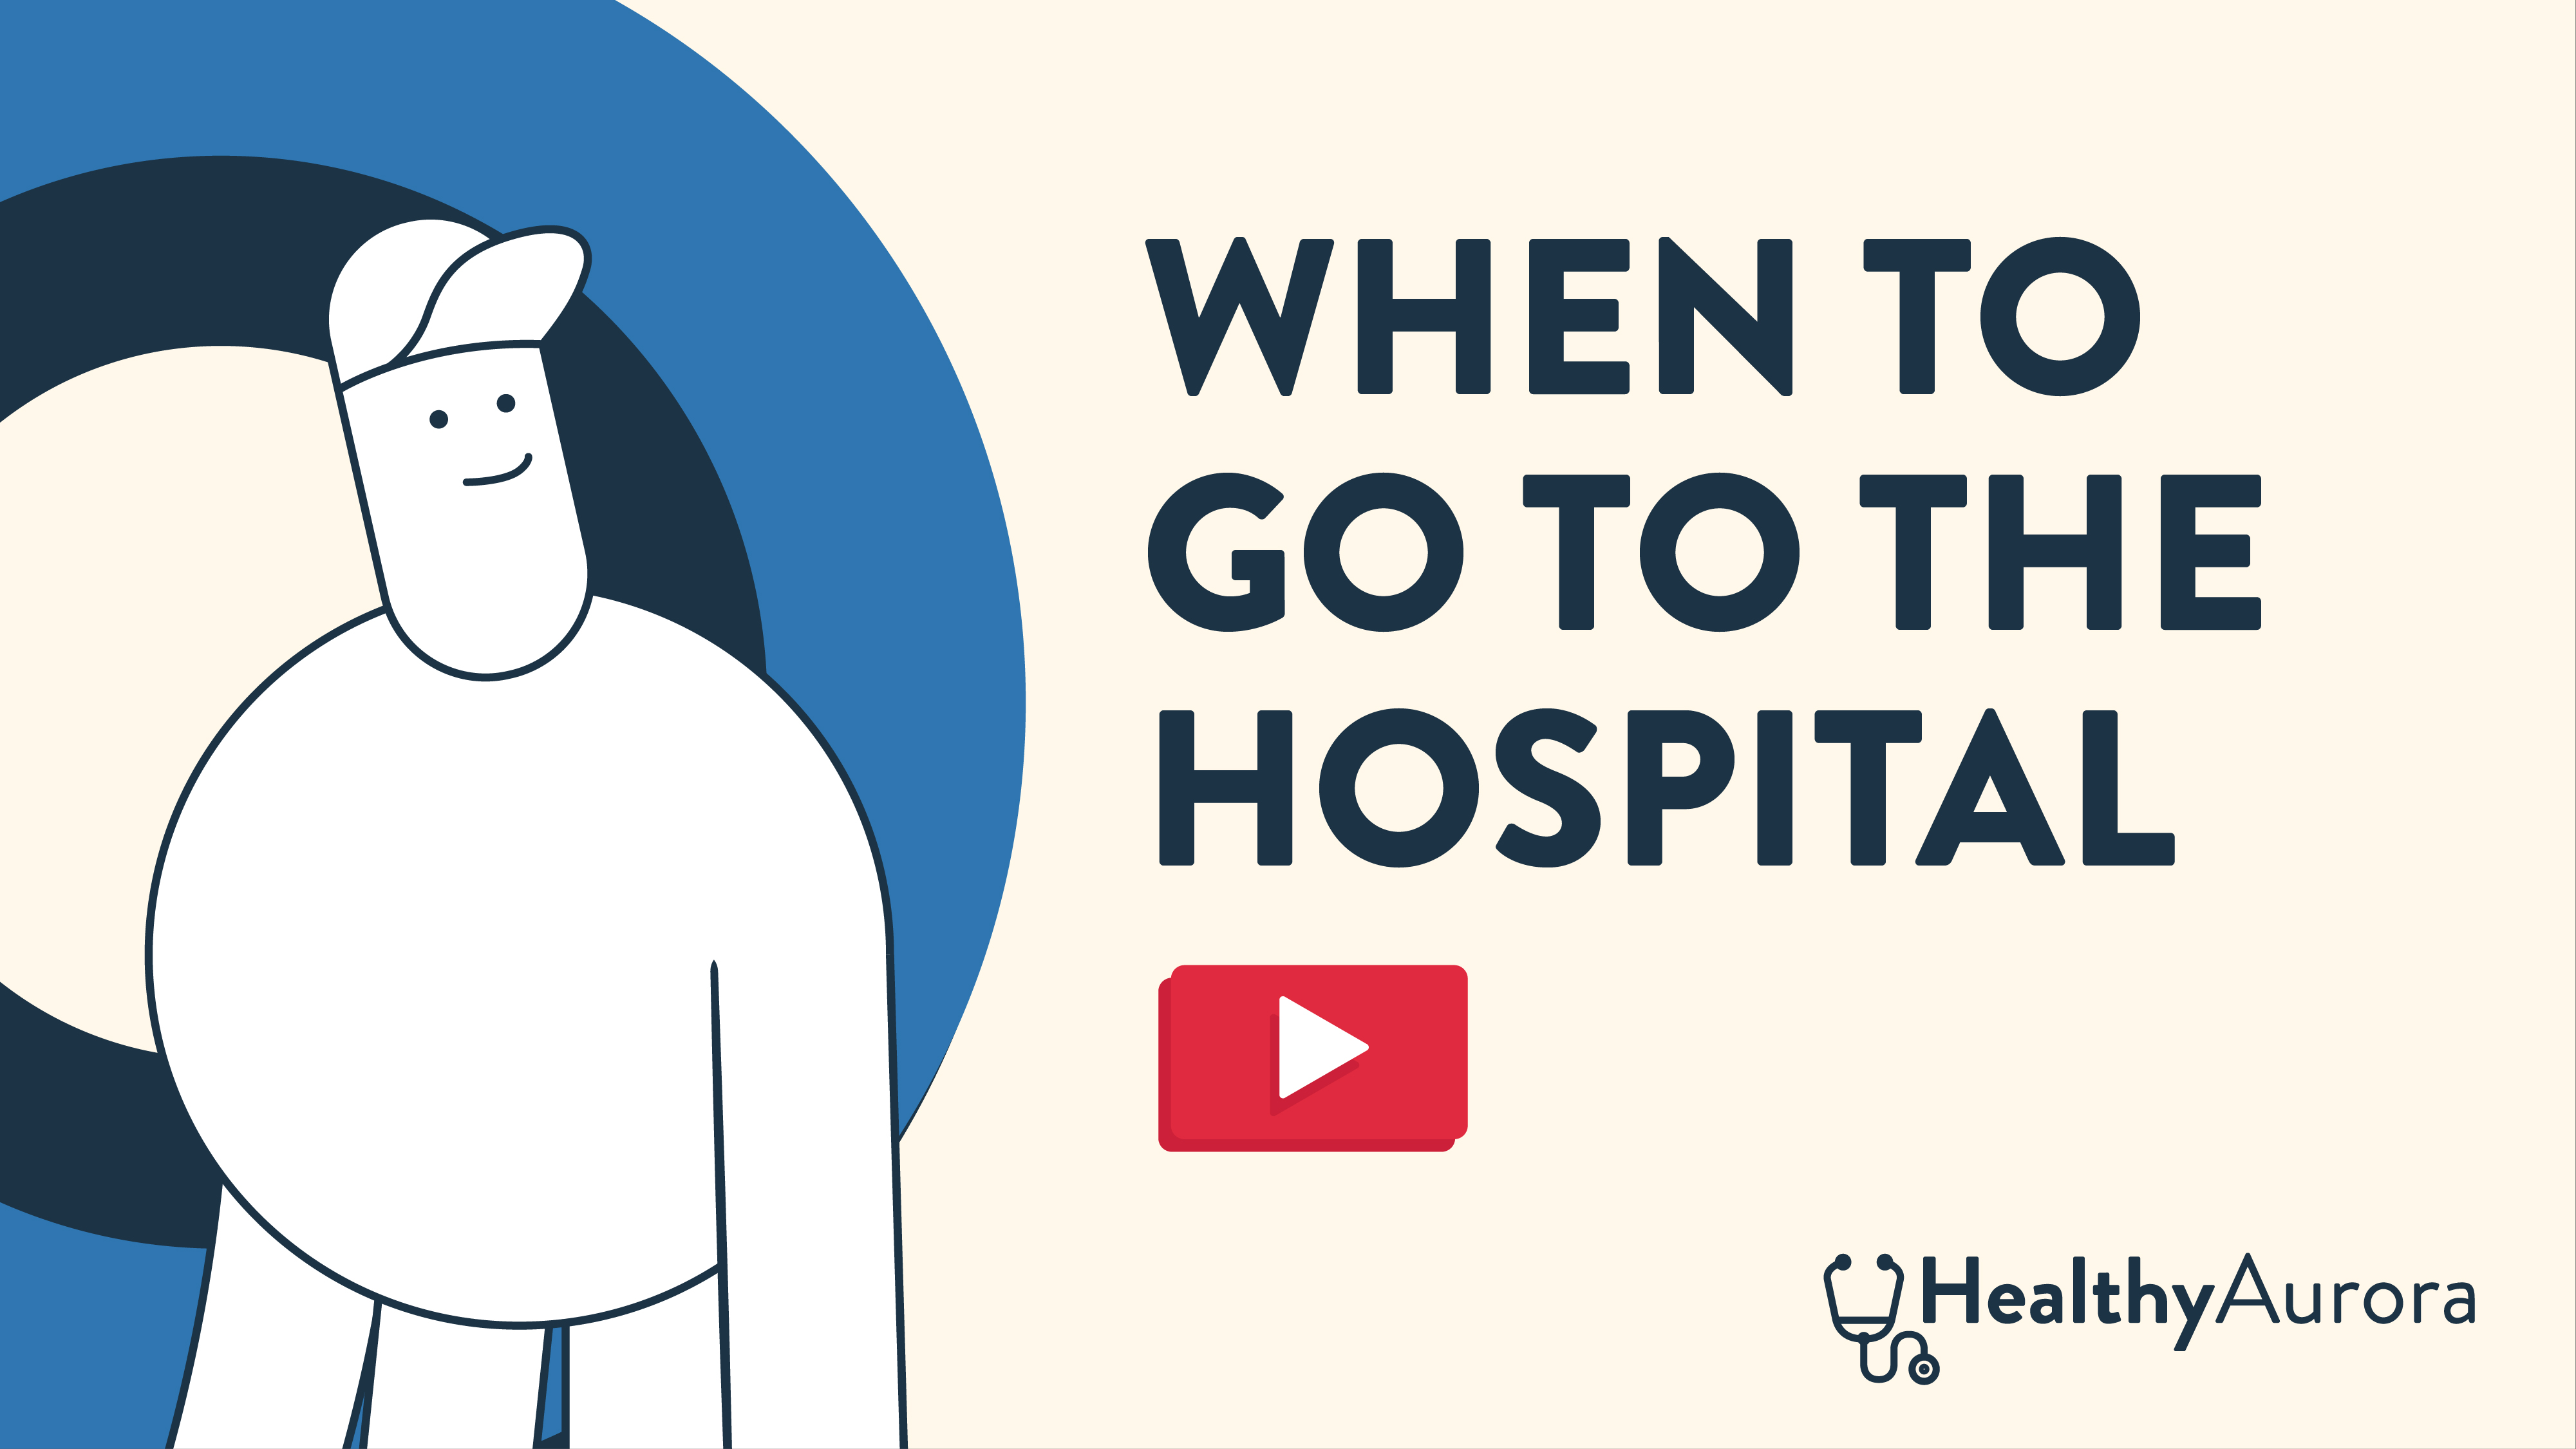 When to Go to the Hospital